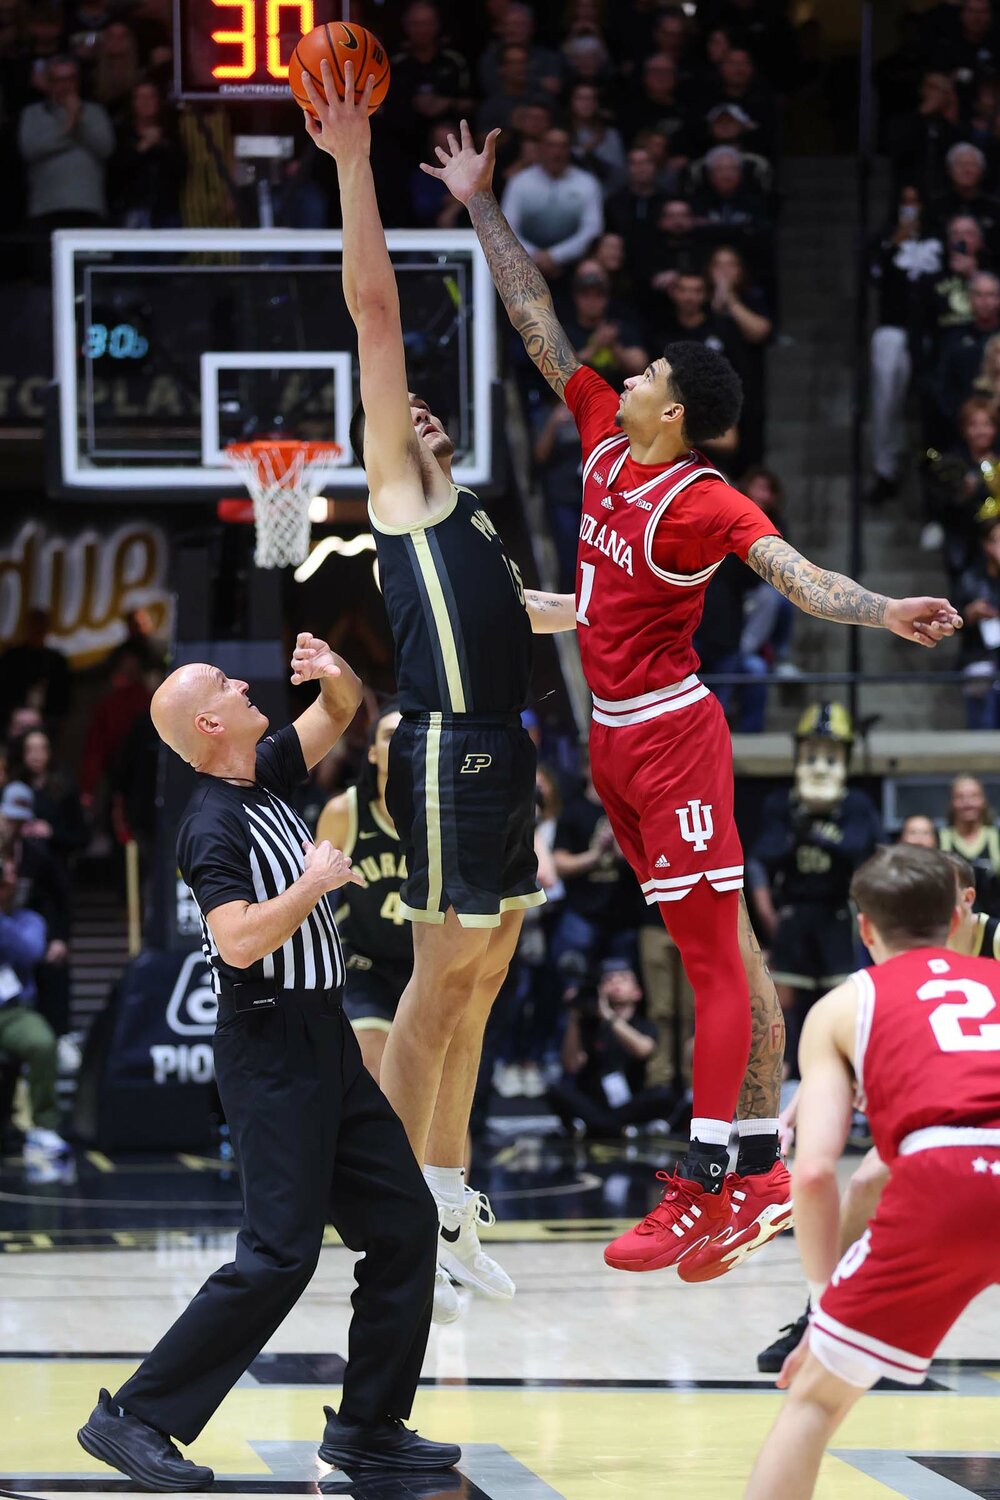 Zach Edey of Purdue - out jumping Kel'el Ware of Indiana on the center jump